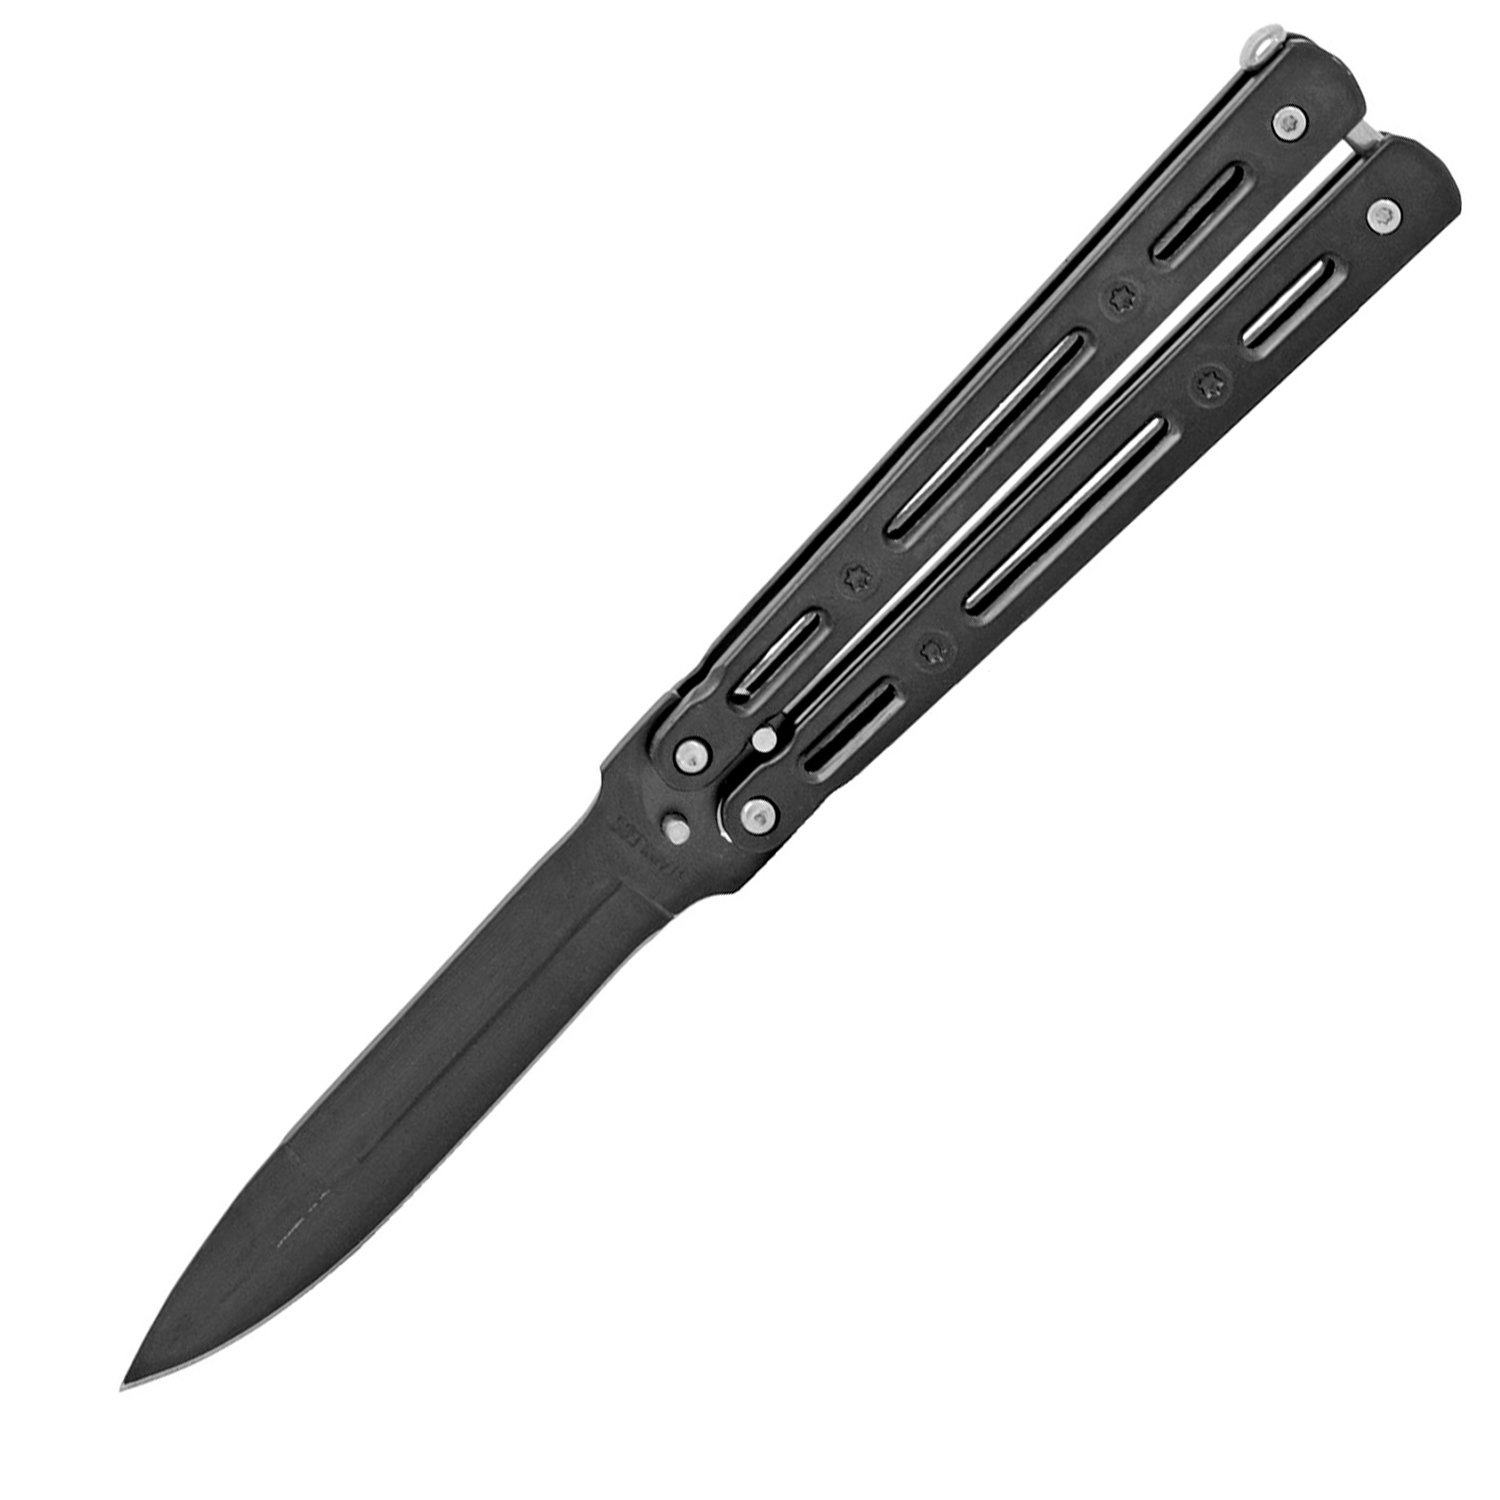 Super Duty State of the Art Balisong Butterfly Knife Black